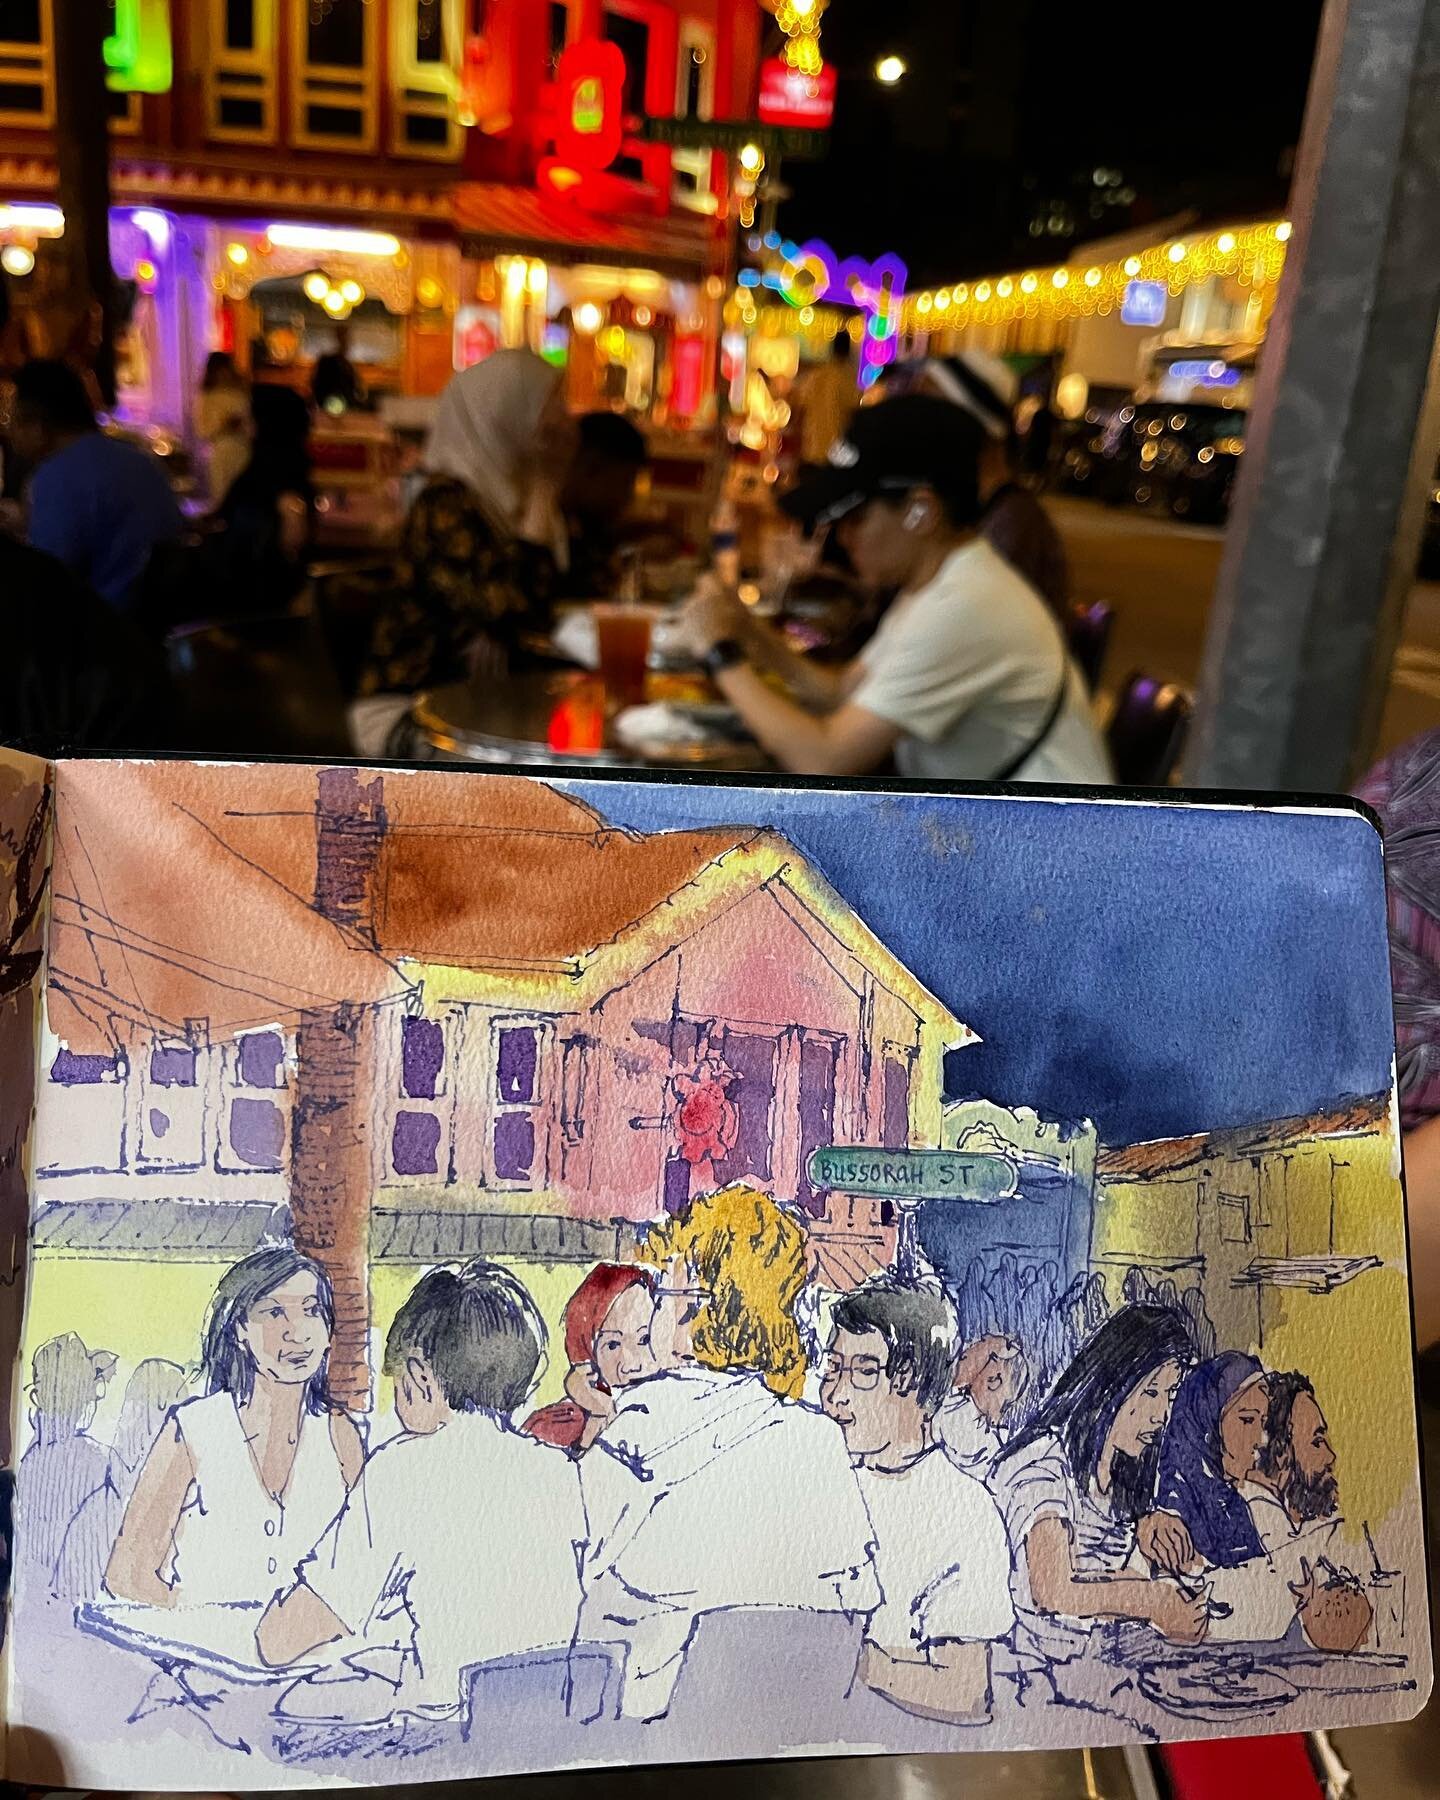 Caught sketching people in the Ramadan bazaar, happening all this month around Arab street, Aliwal and Buzzorah street. It was busy, bustling and rattling after none for the past 3 years! #ramadanmubarak #ramadanbazaarsingapore #singaporescenes #sgig